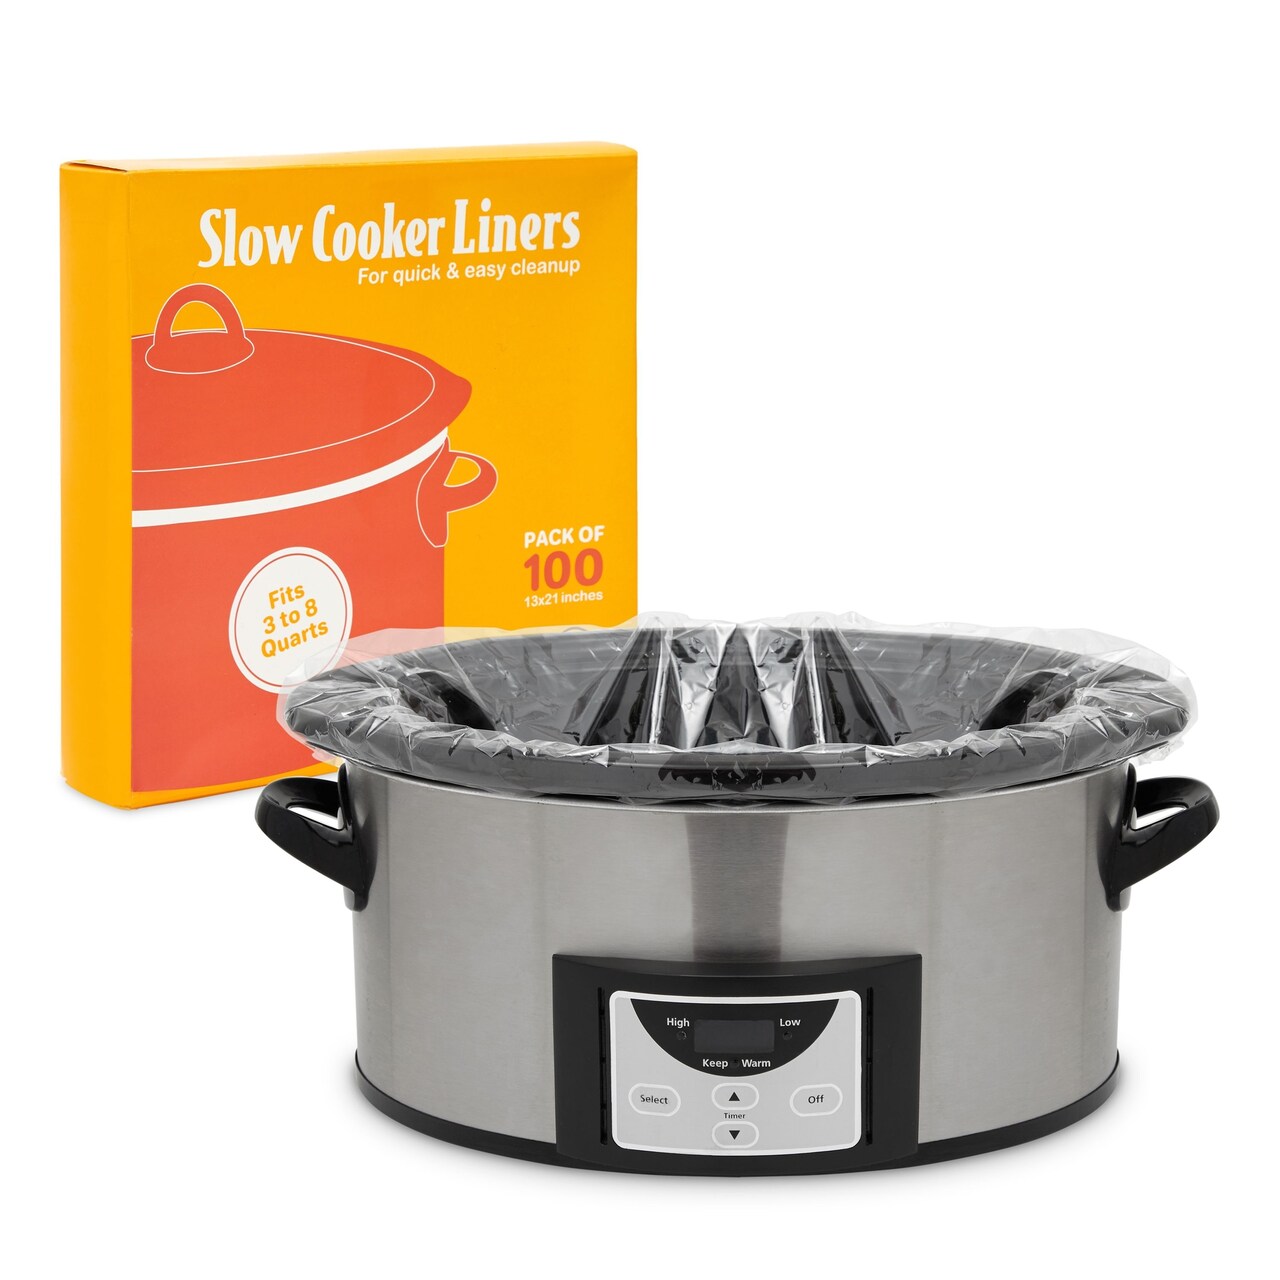 Slow Cooker Liners, Regular Size Clear Plastic Bags for Cooking